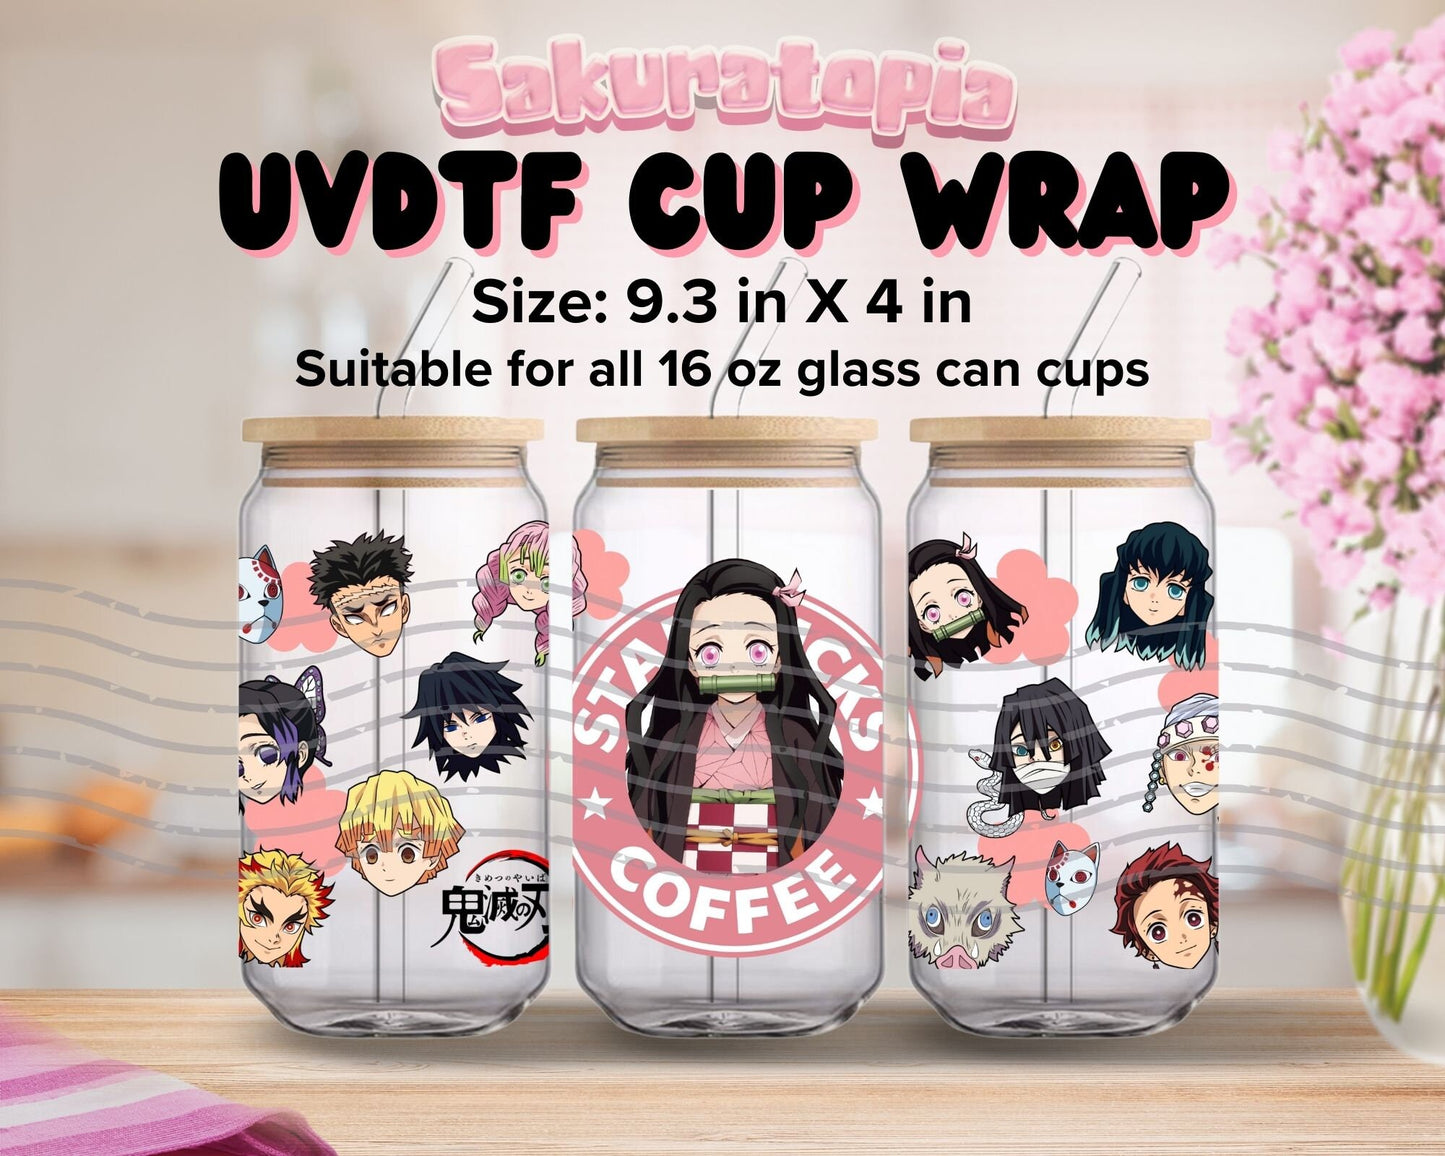 UVDTF Demon Anime Cup Wrap, Ready to Use Glass Cup Wrap for Glass Can | Ready to Apply UVDTF, UVDTF Transfers